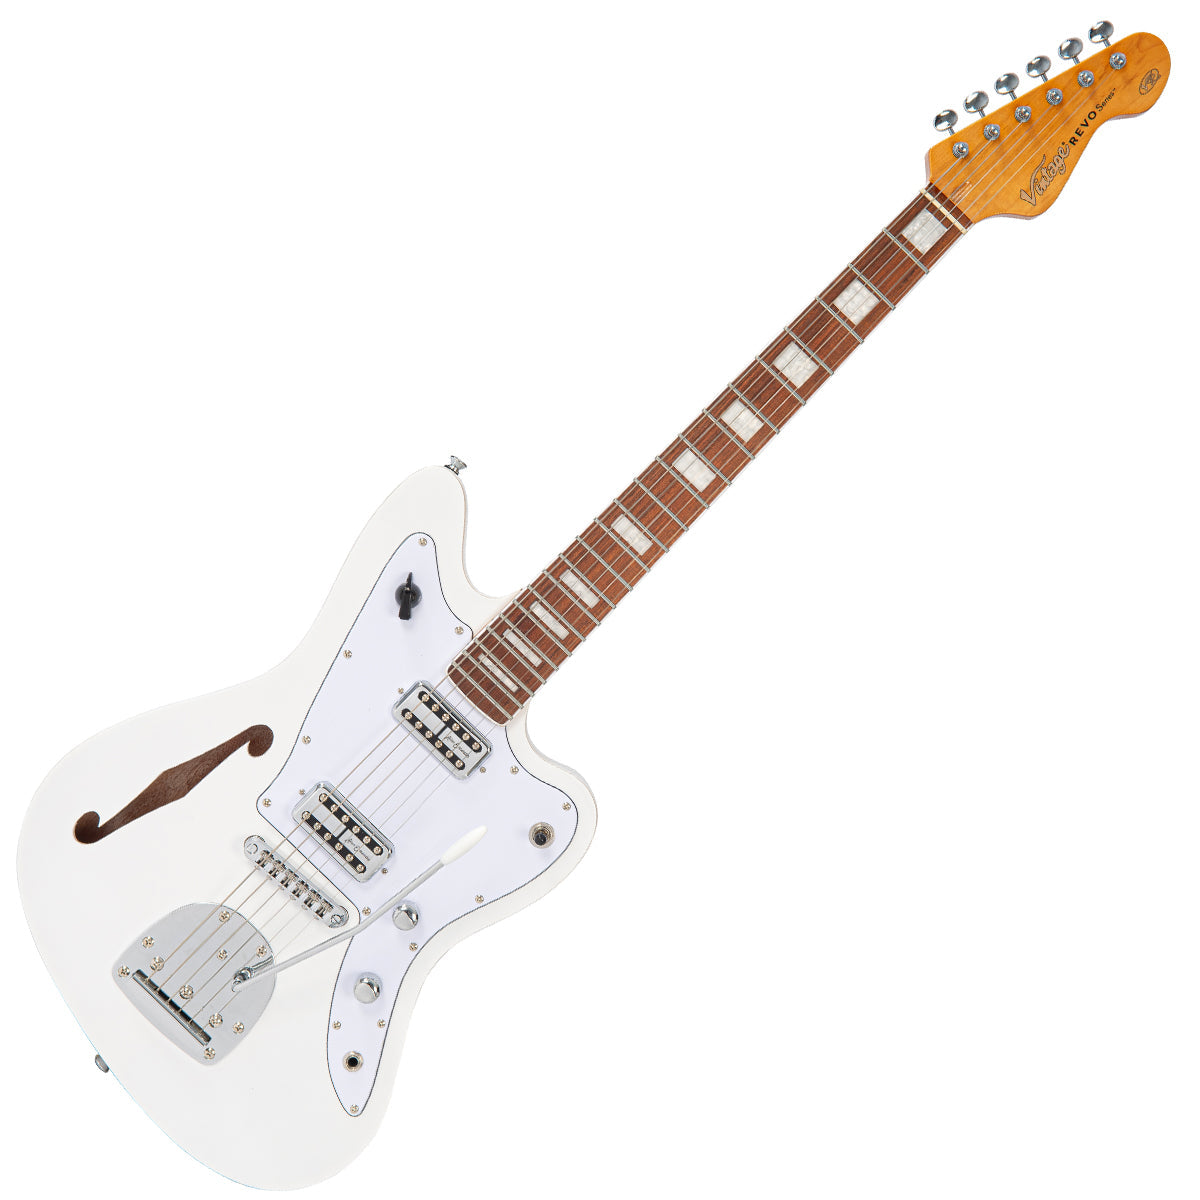 Vintage REVO Series 'Surfmaster Thinline' Twin Electric Guitar ~ Arctic White, Electric Guitars for sale at Richards Guitars.